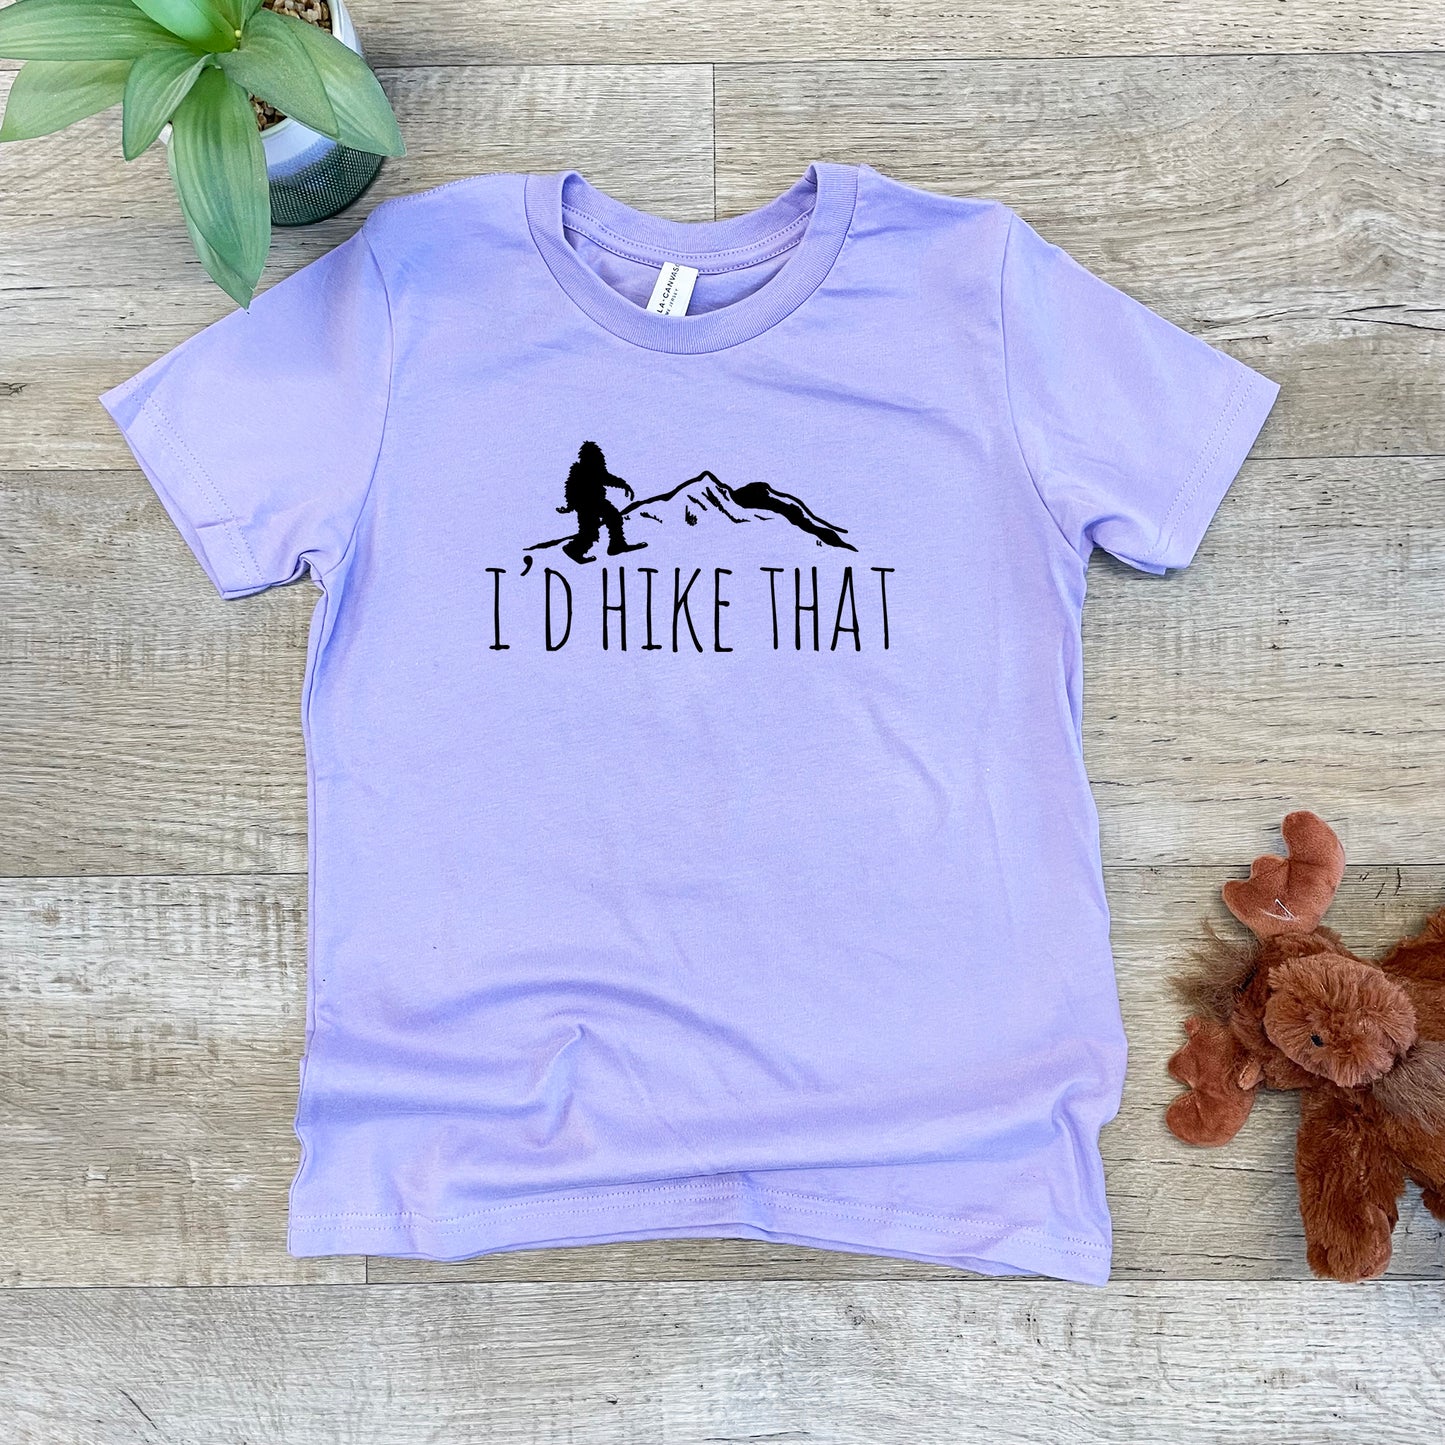 I'd Hike That - Kid's Tee - Columbia Blue or Lavender